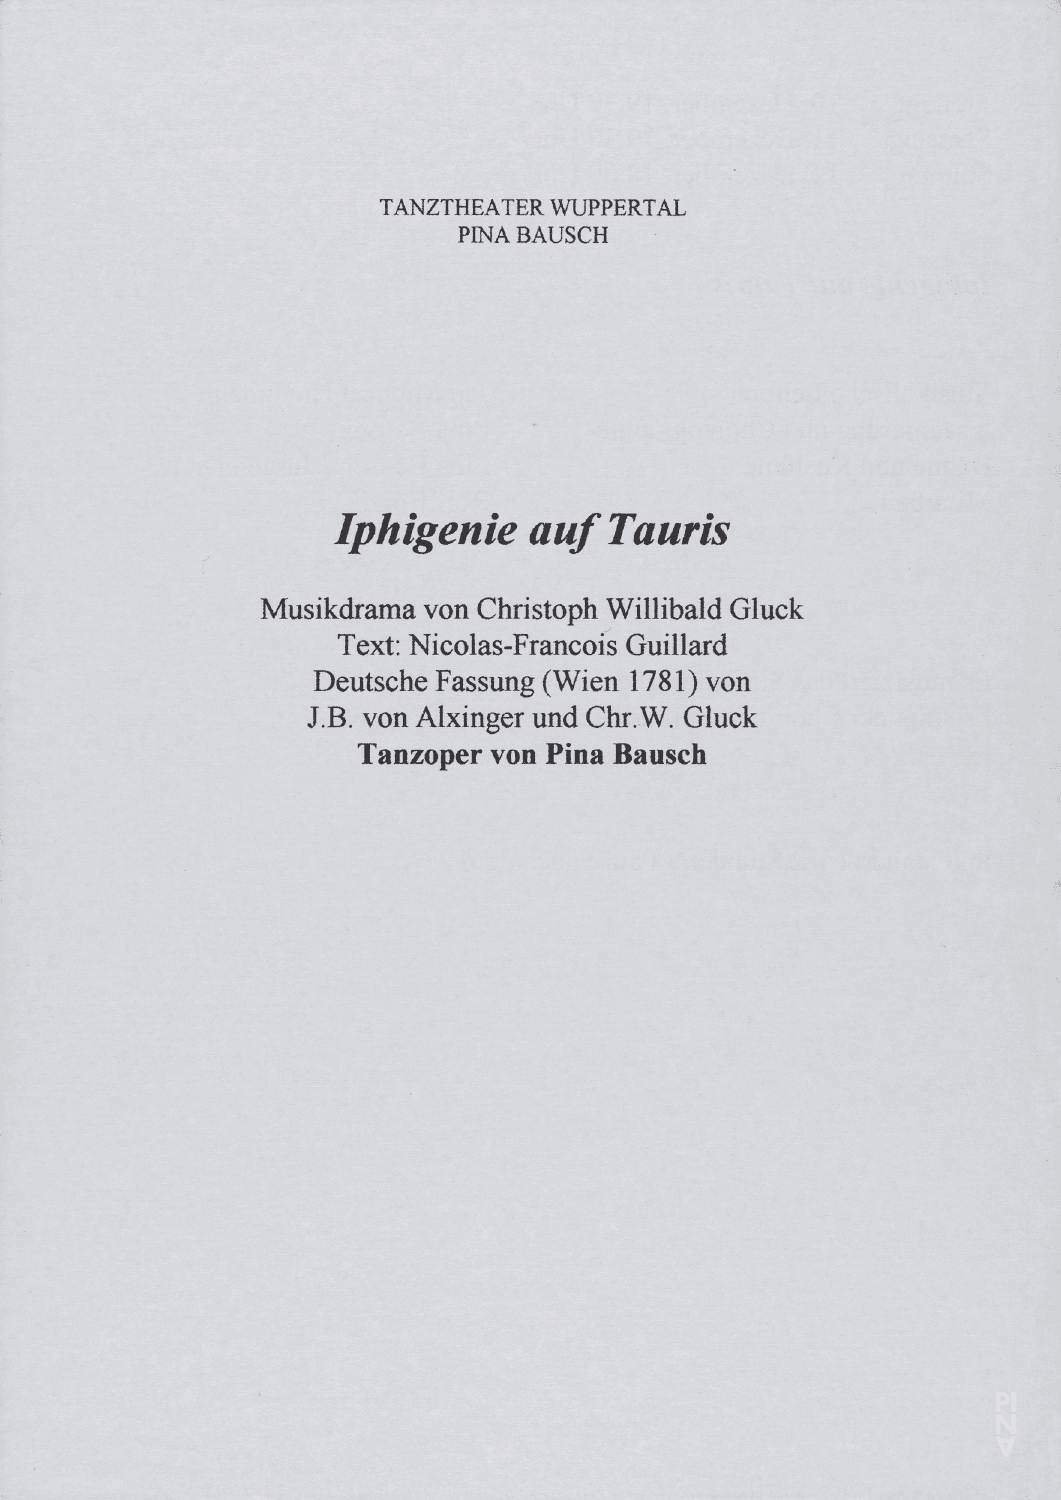 Evening leaflet for “Iphigenie auf Tauris” by Pina Bausch with Tanztheater Wuppertal in in Wuppertal, 12/10/1999 – 12/12/1999